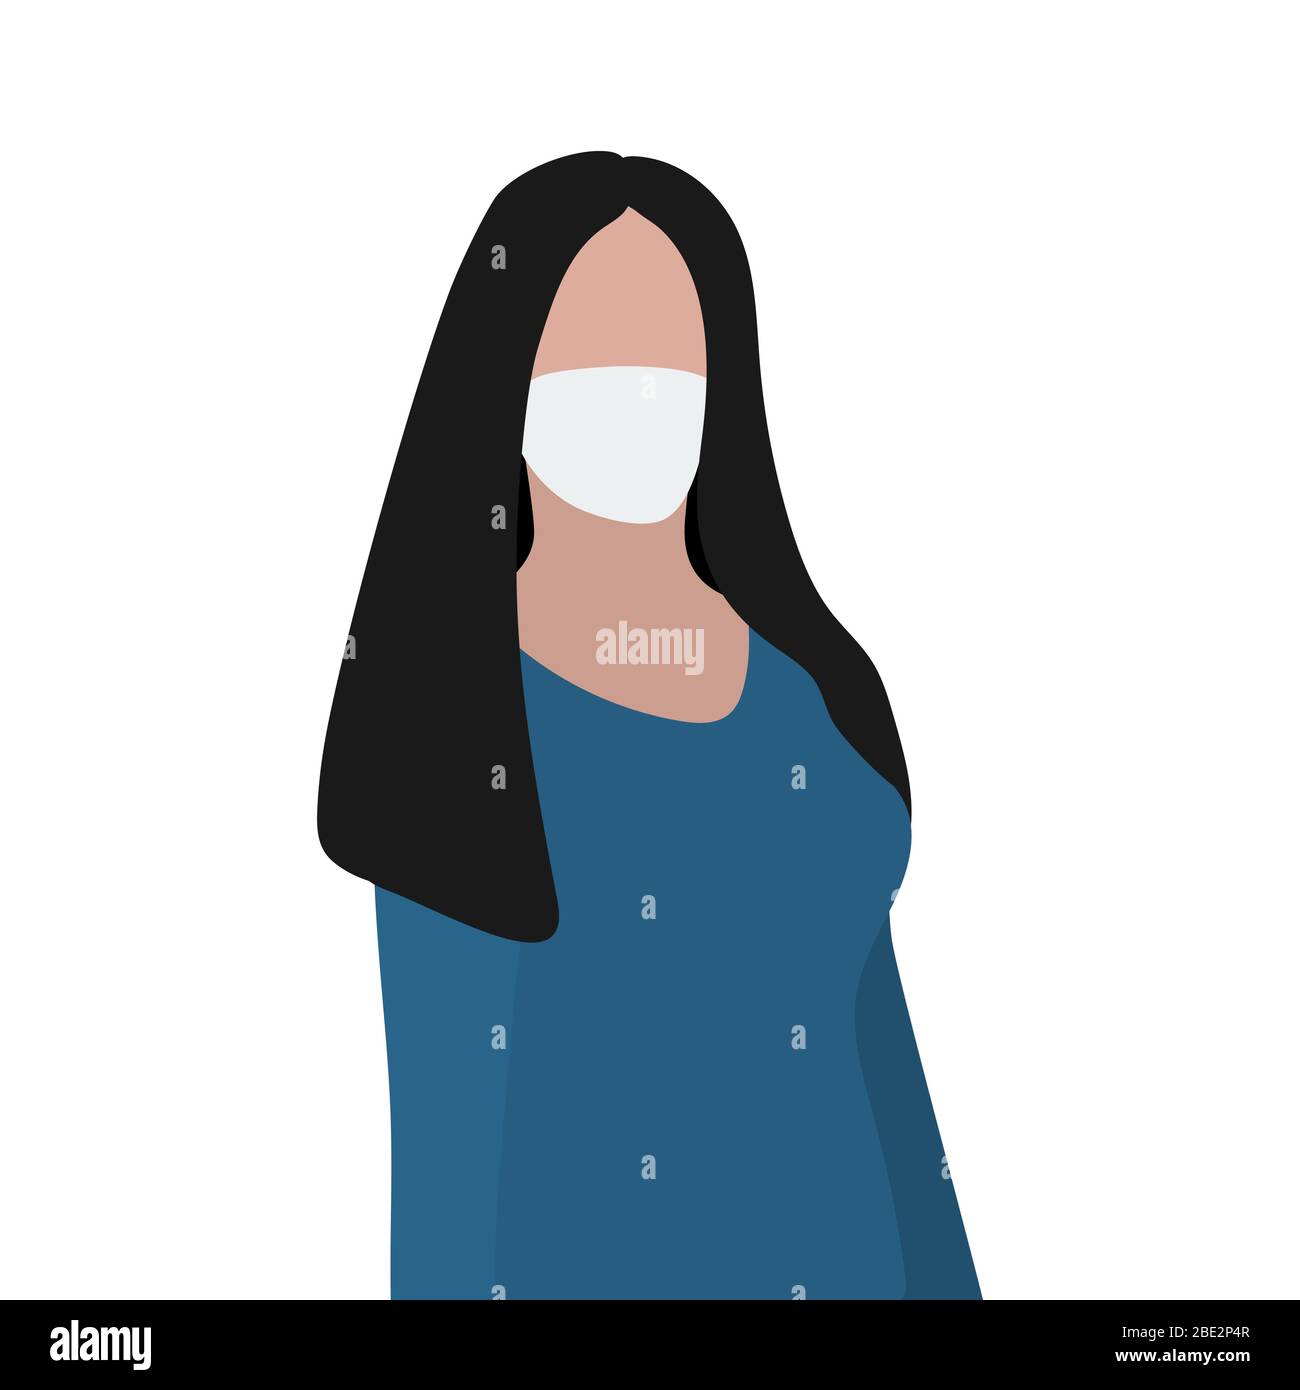 Woman in a protective mask against viruses. Fashion trendy illustration, flat design. Pandemic and epidemic of coronavirus in the world. Stock Vector